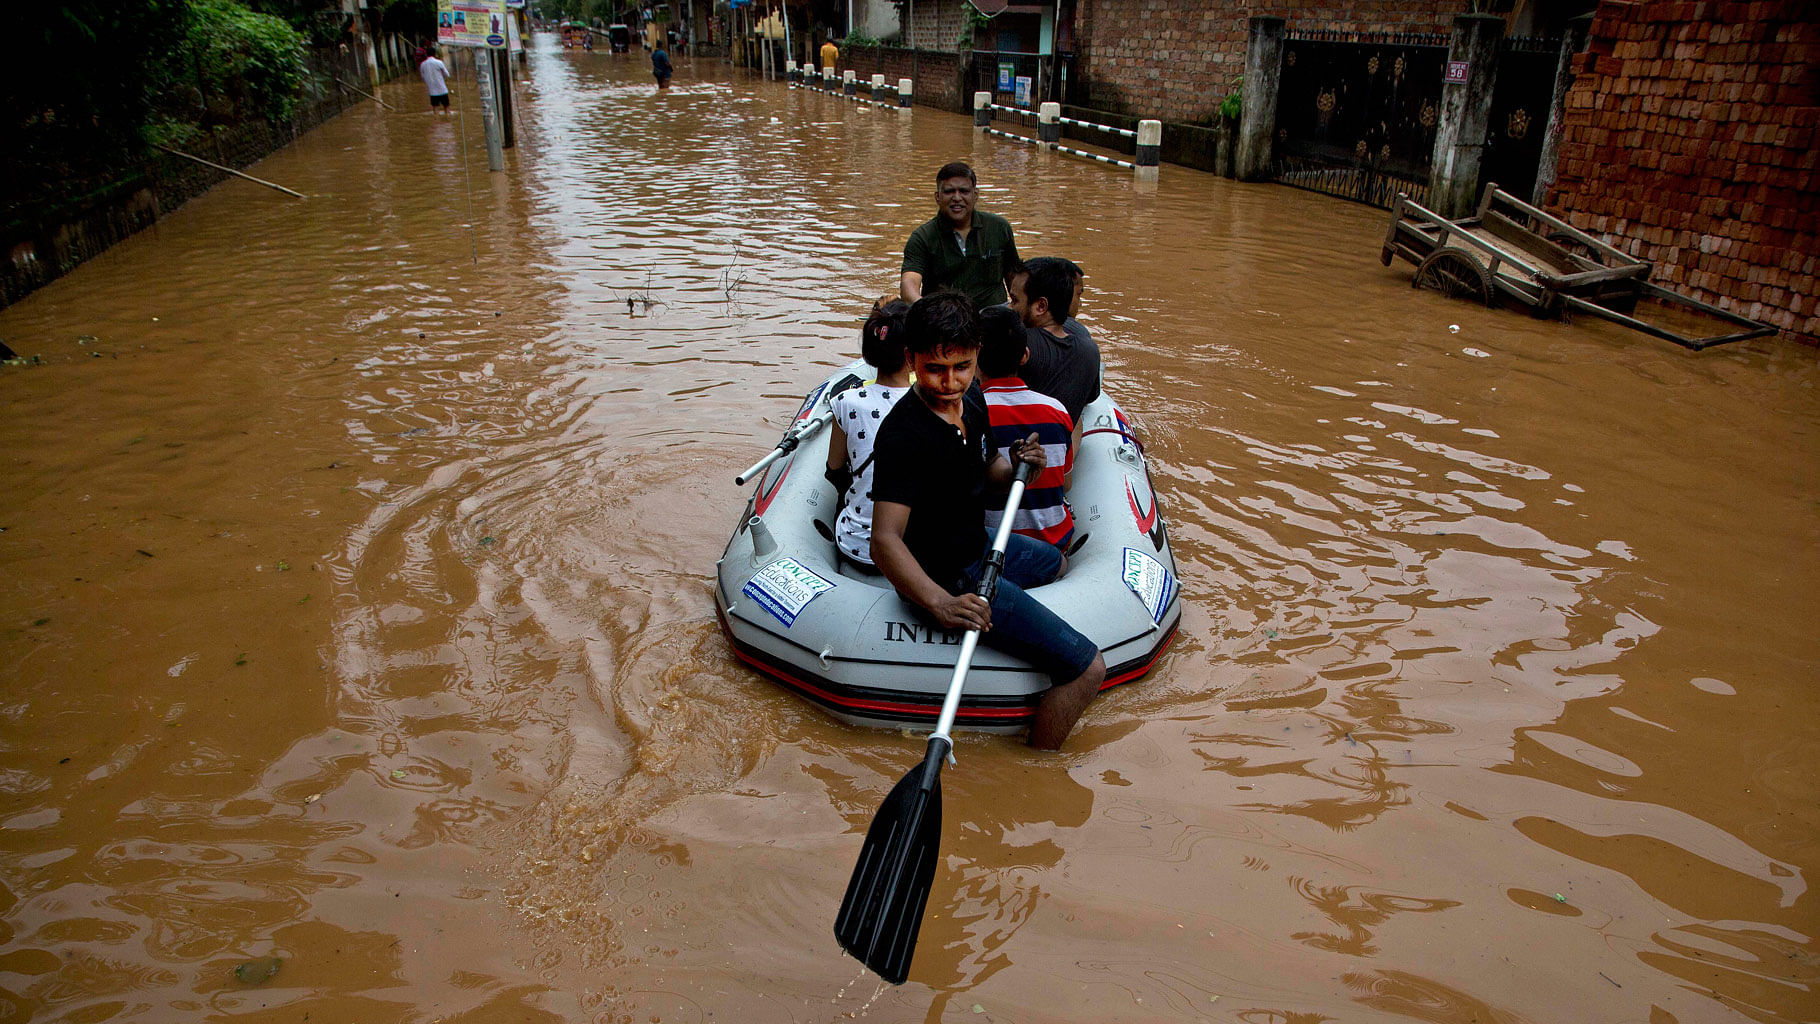 

Volunteers shift people to higher areas after heavy monsoon rains flooded parts of Gauhati. (Photo: AP)